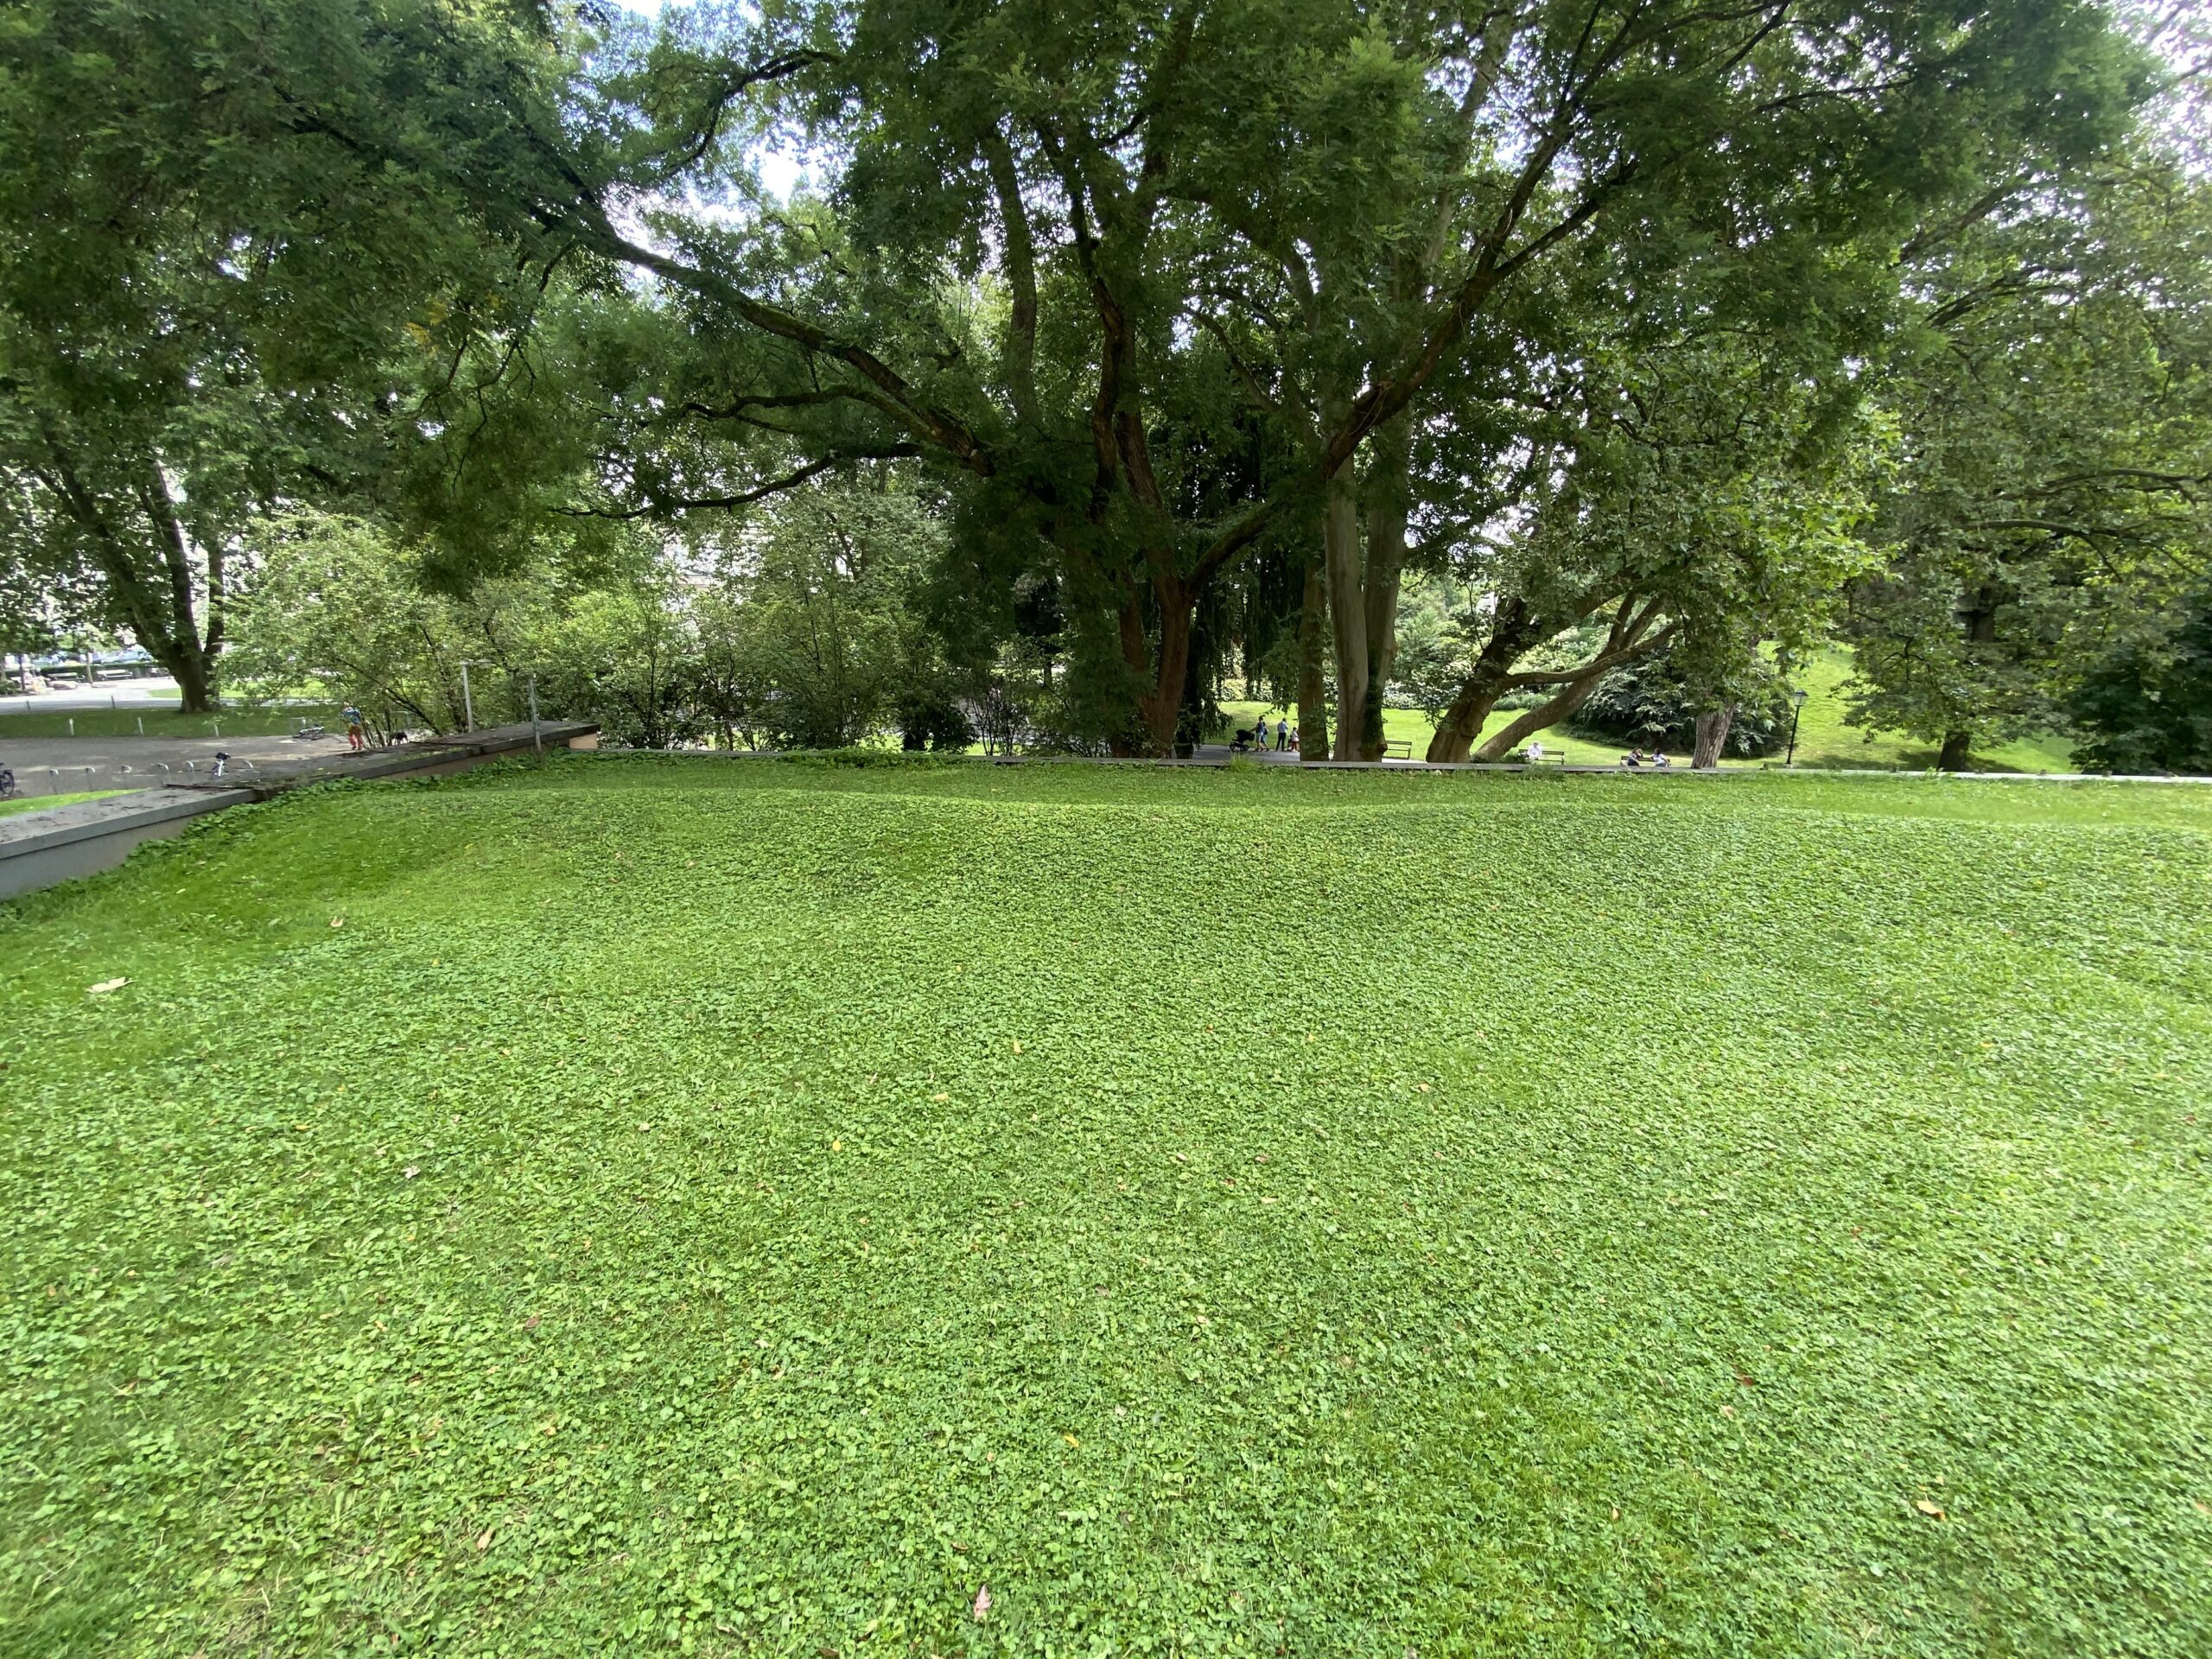 a large tree in a grassy area